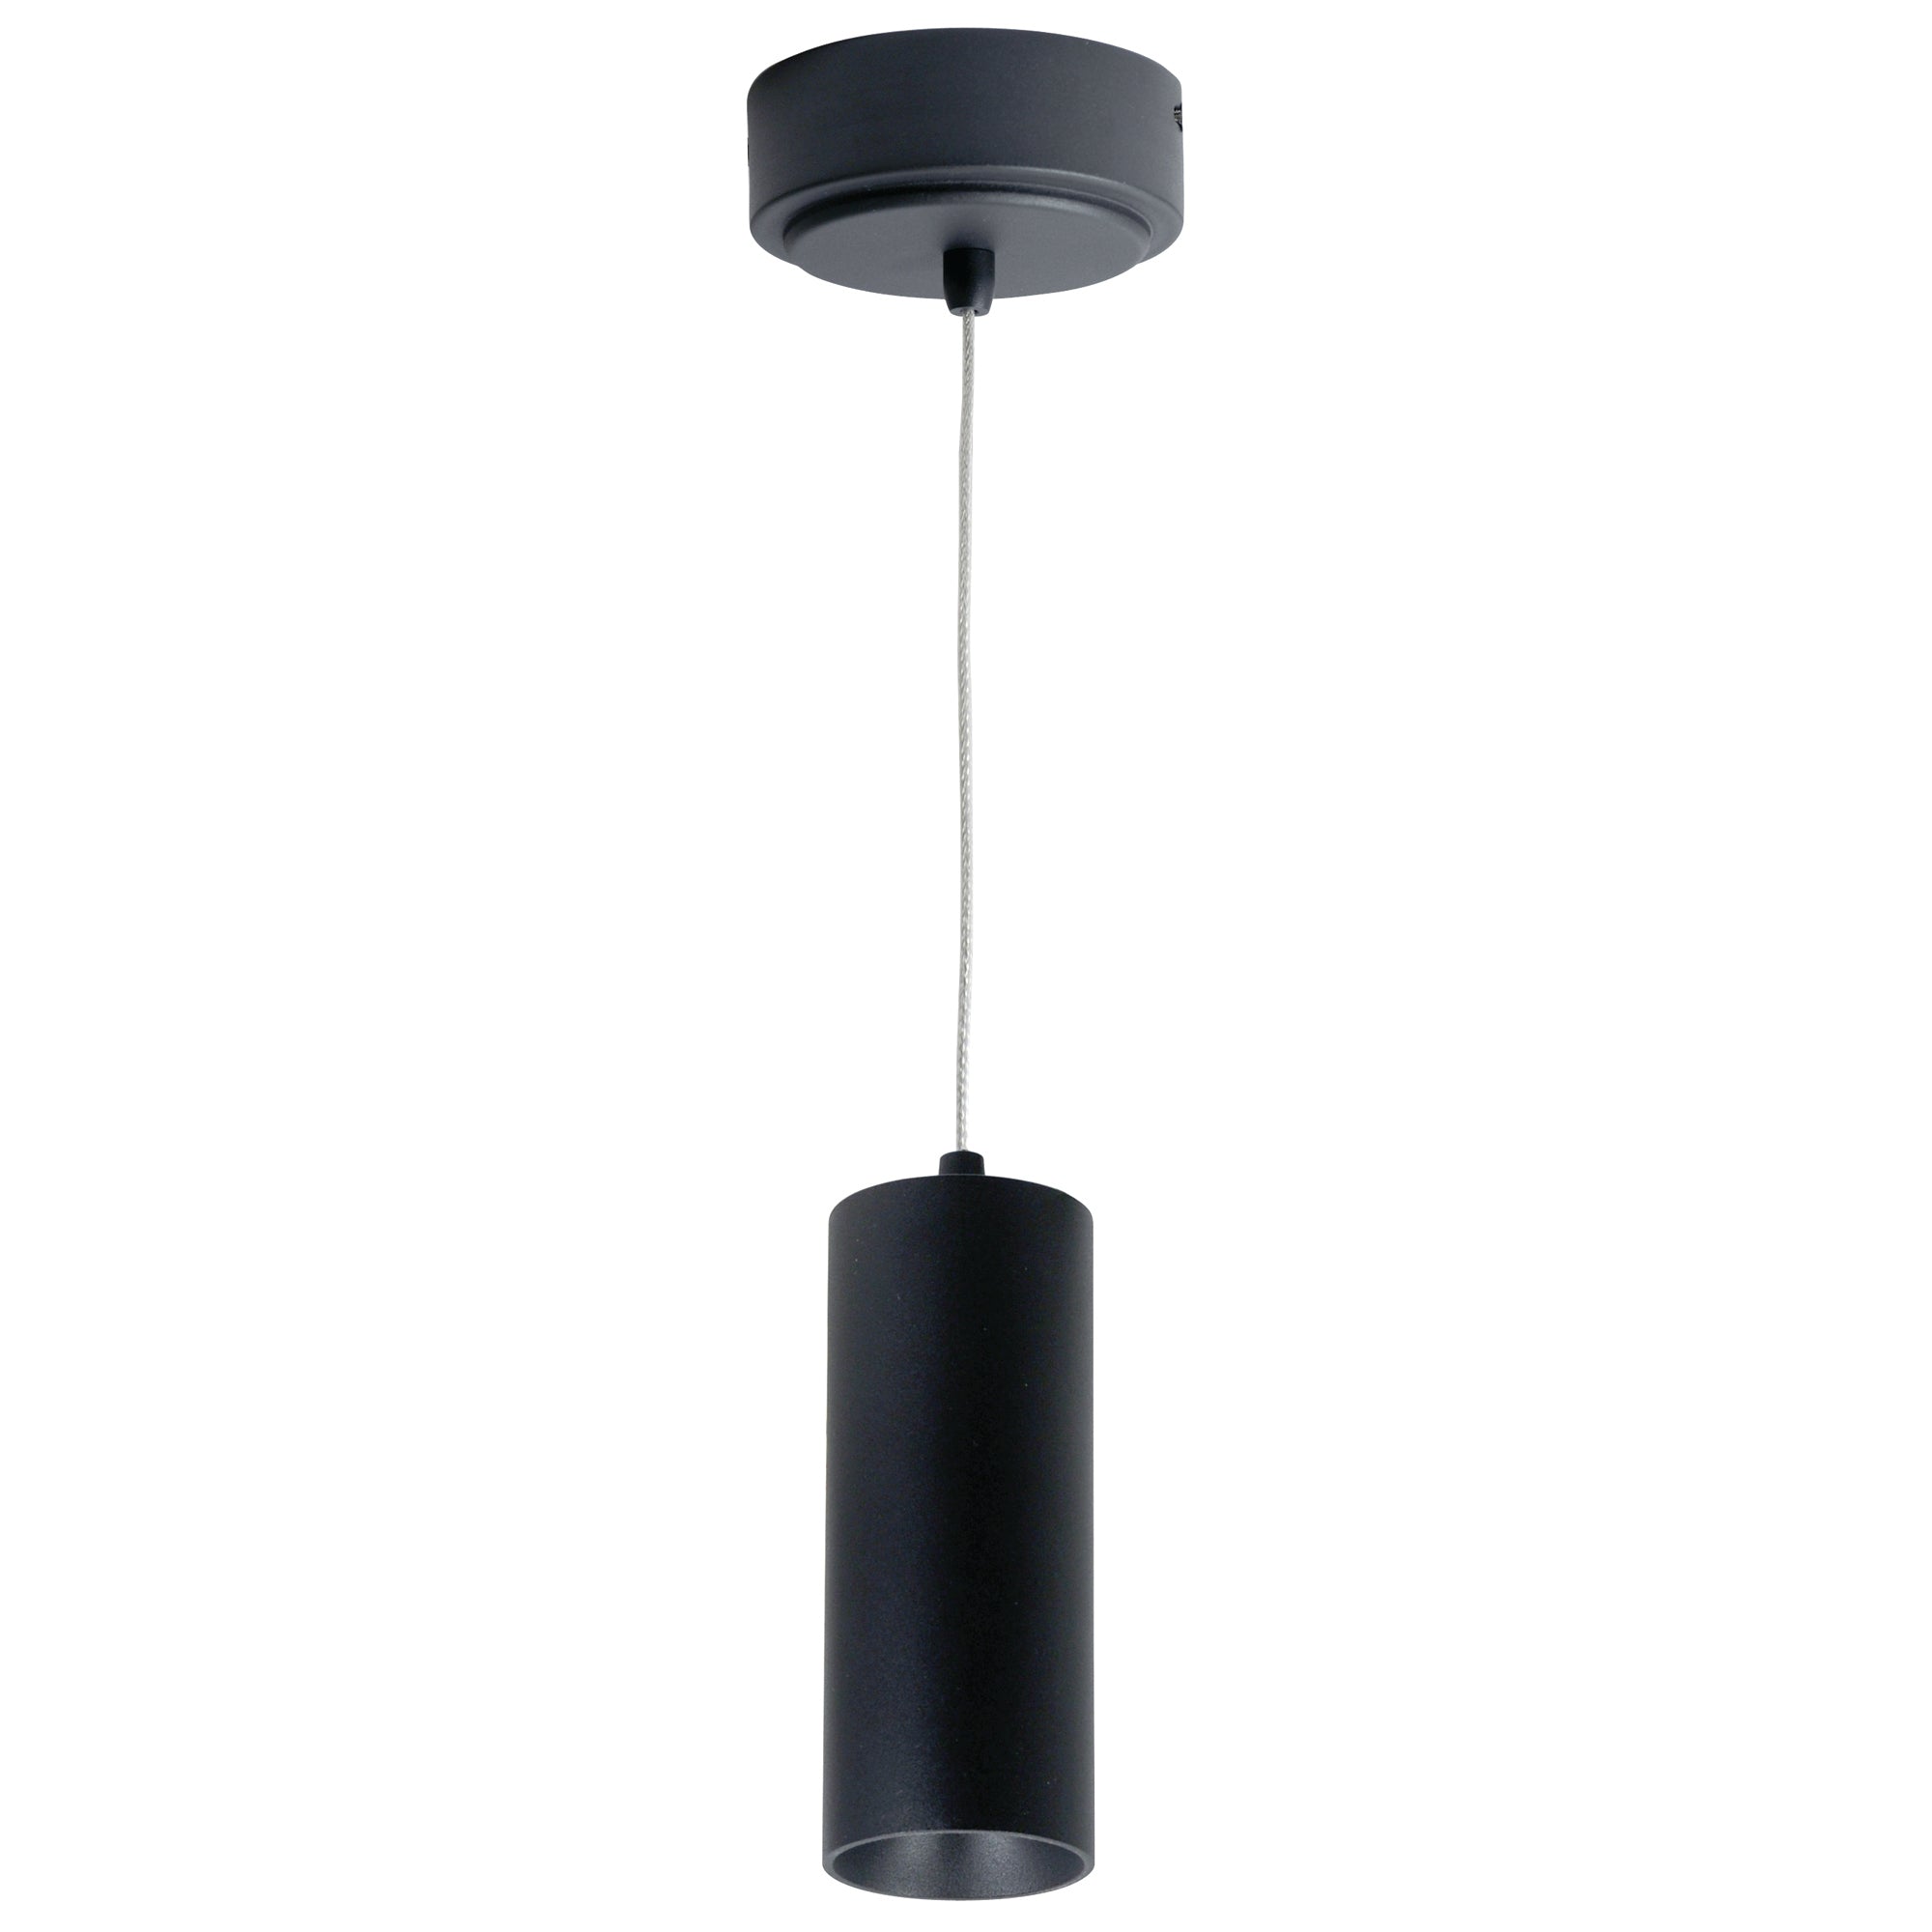 Nora Lighting LE56 - NYLM-2C40XBBLE4A - Cylinder - Black